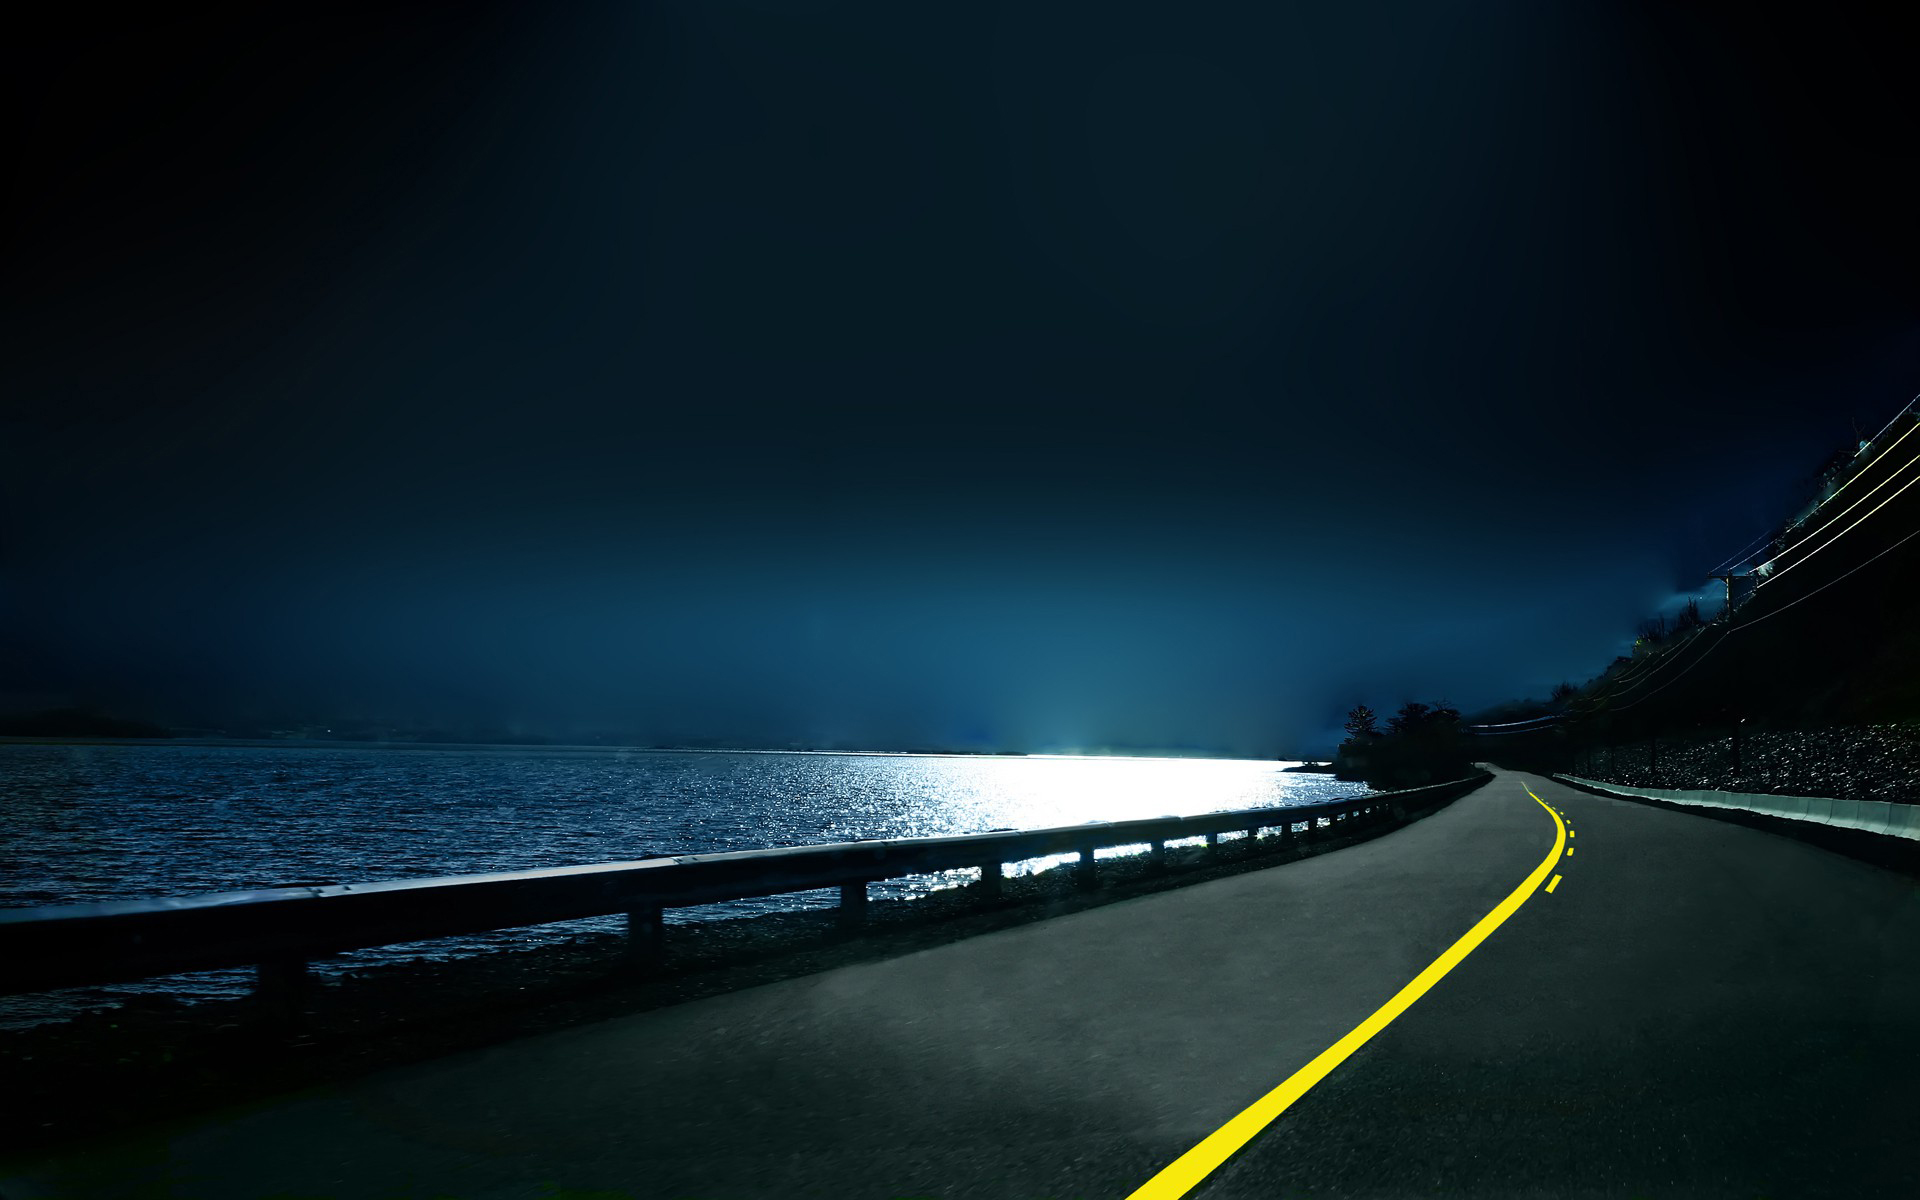 Road HD Wallpaper | Background Image | 1920x1200